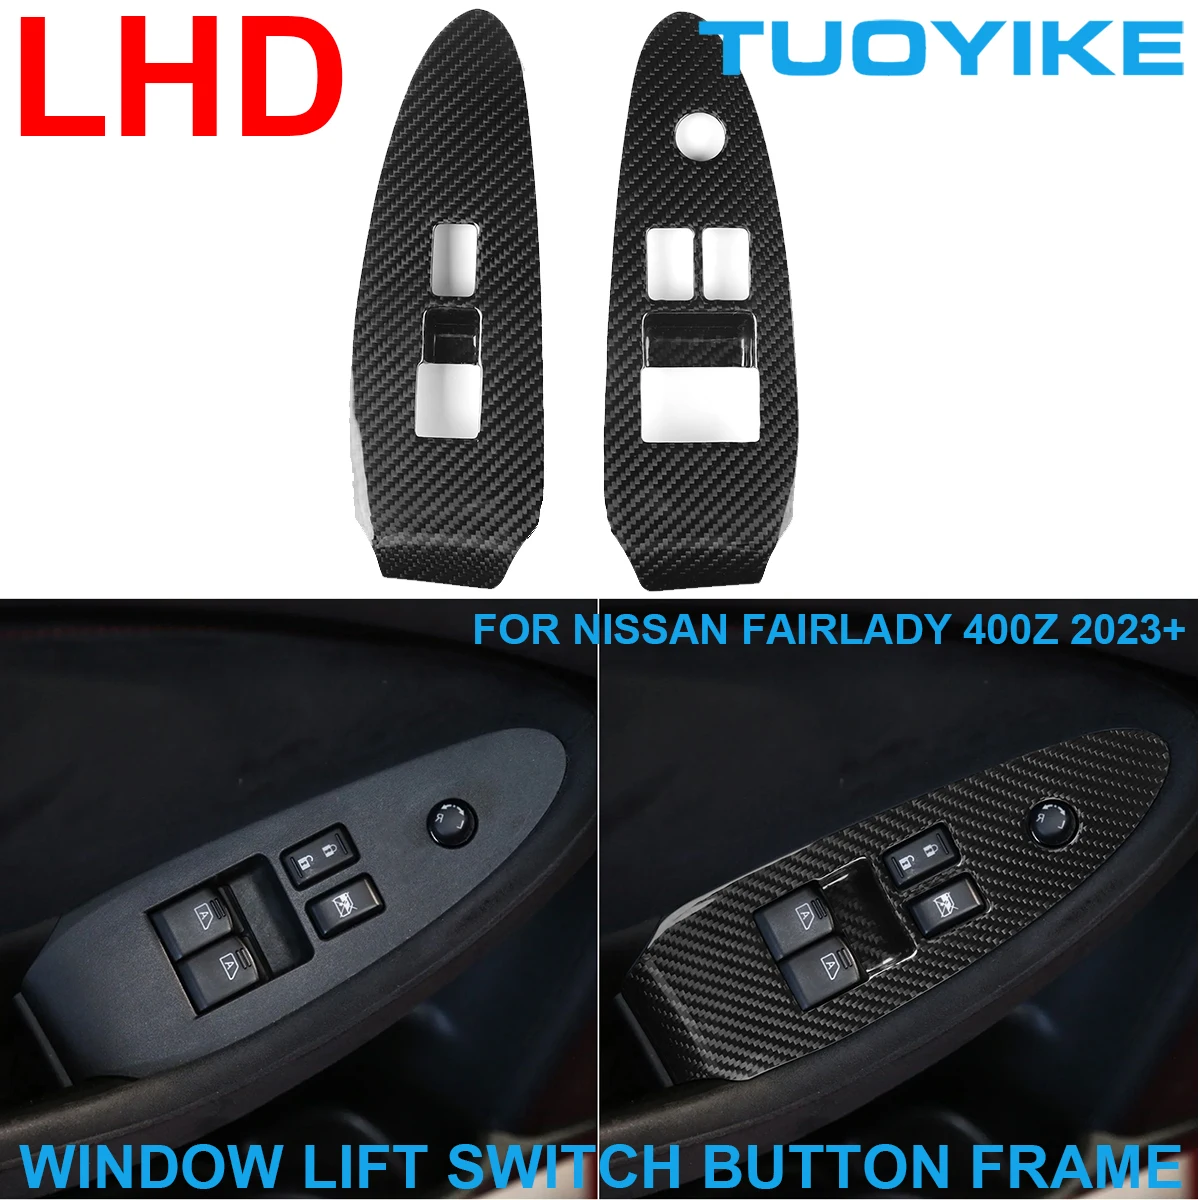 

LHD Car Real Dry Carbon Fiber Interior Window Lift Switch Button Trim Cover Decoration Panel For Nissan Fairlady 400Z 2023+